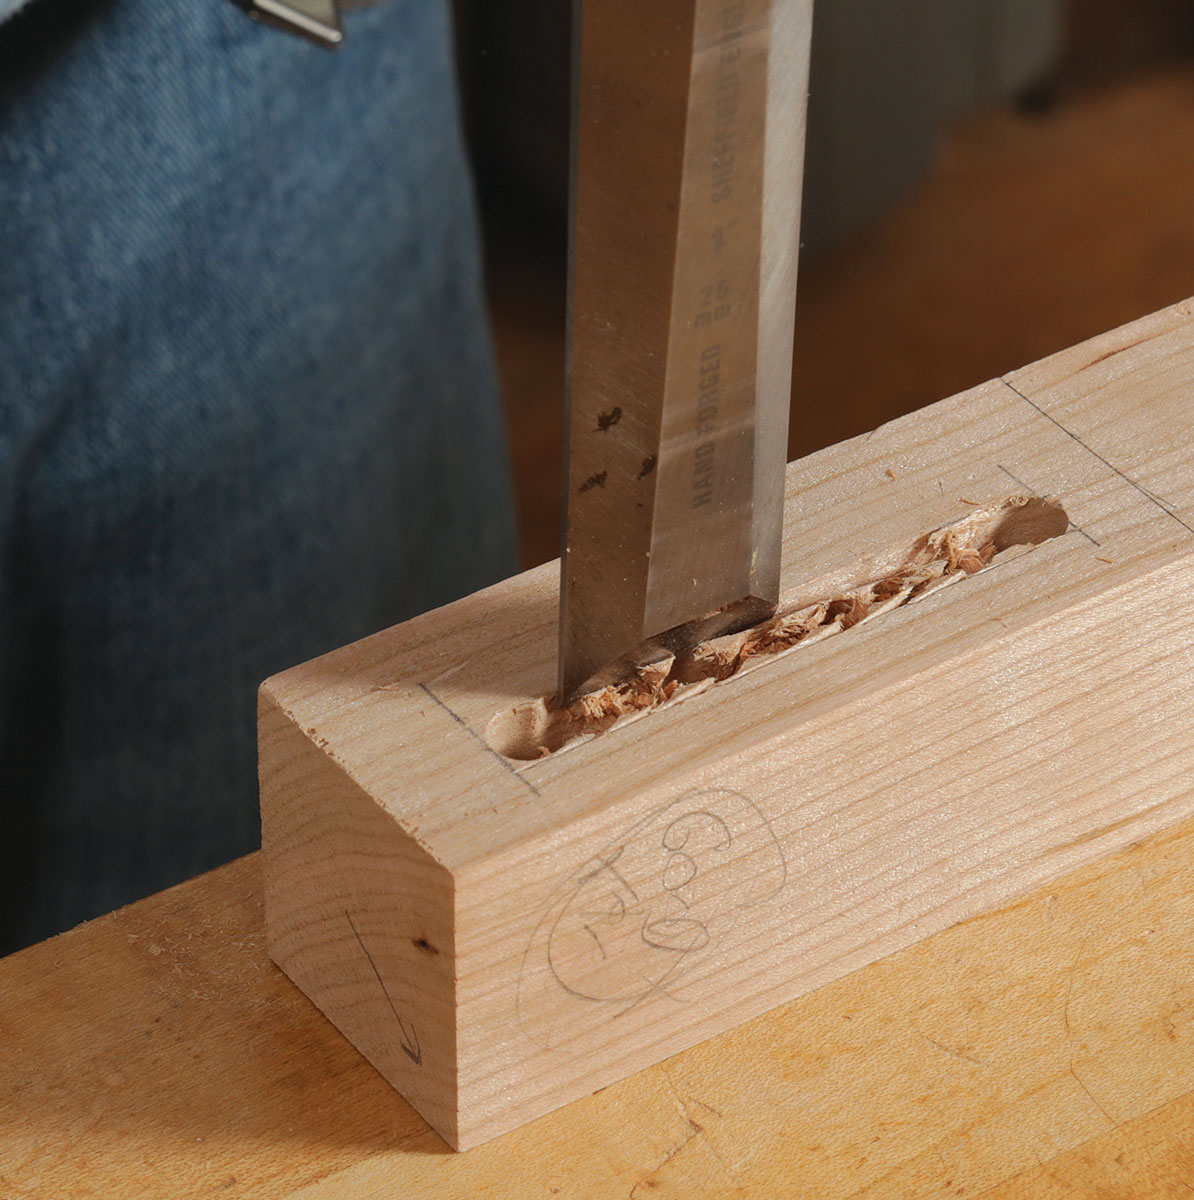 Finish with a chisel. Take careful paring cuts to remove the peaks between the drilled holes. Chop the ends square, too. Be careful near the fragile short grain at the top end. 